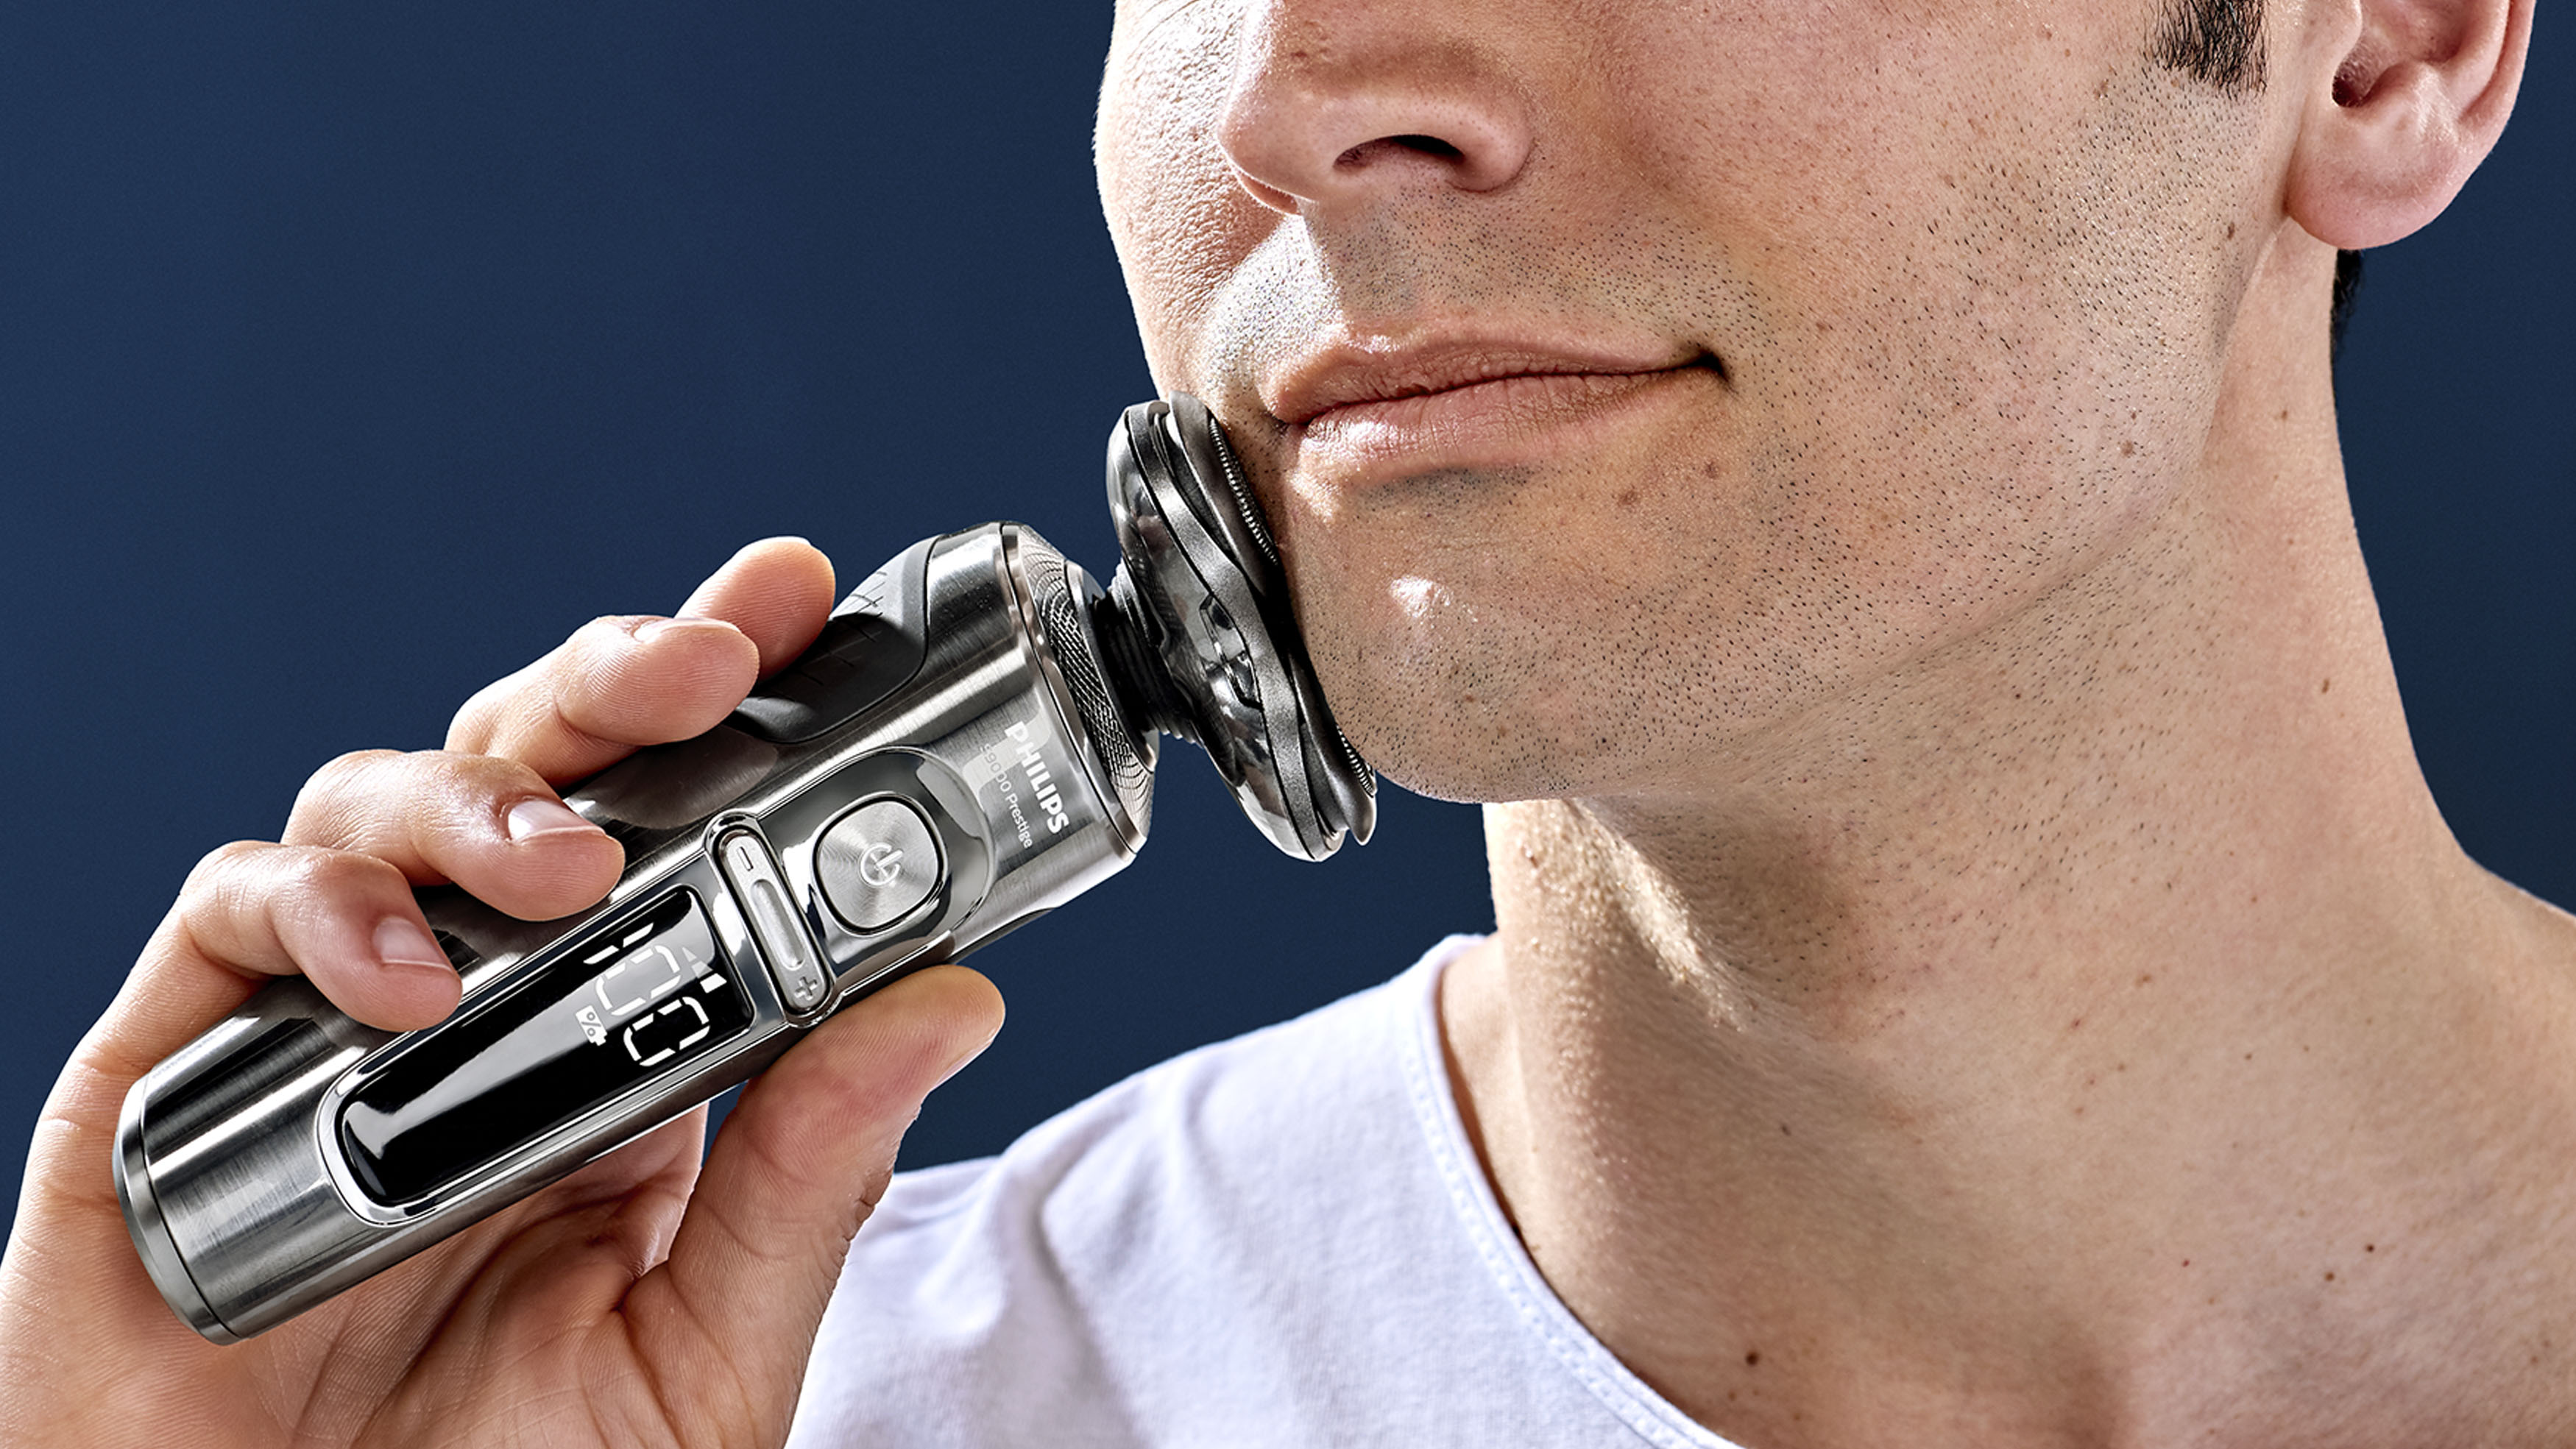 Philips Norelco 7300 and 7700 Electric Shaver Review - Moo Review